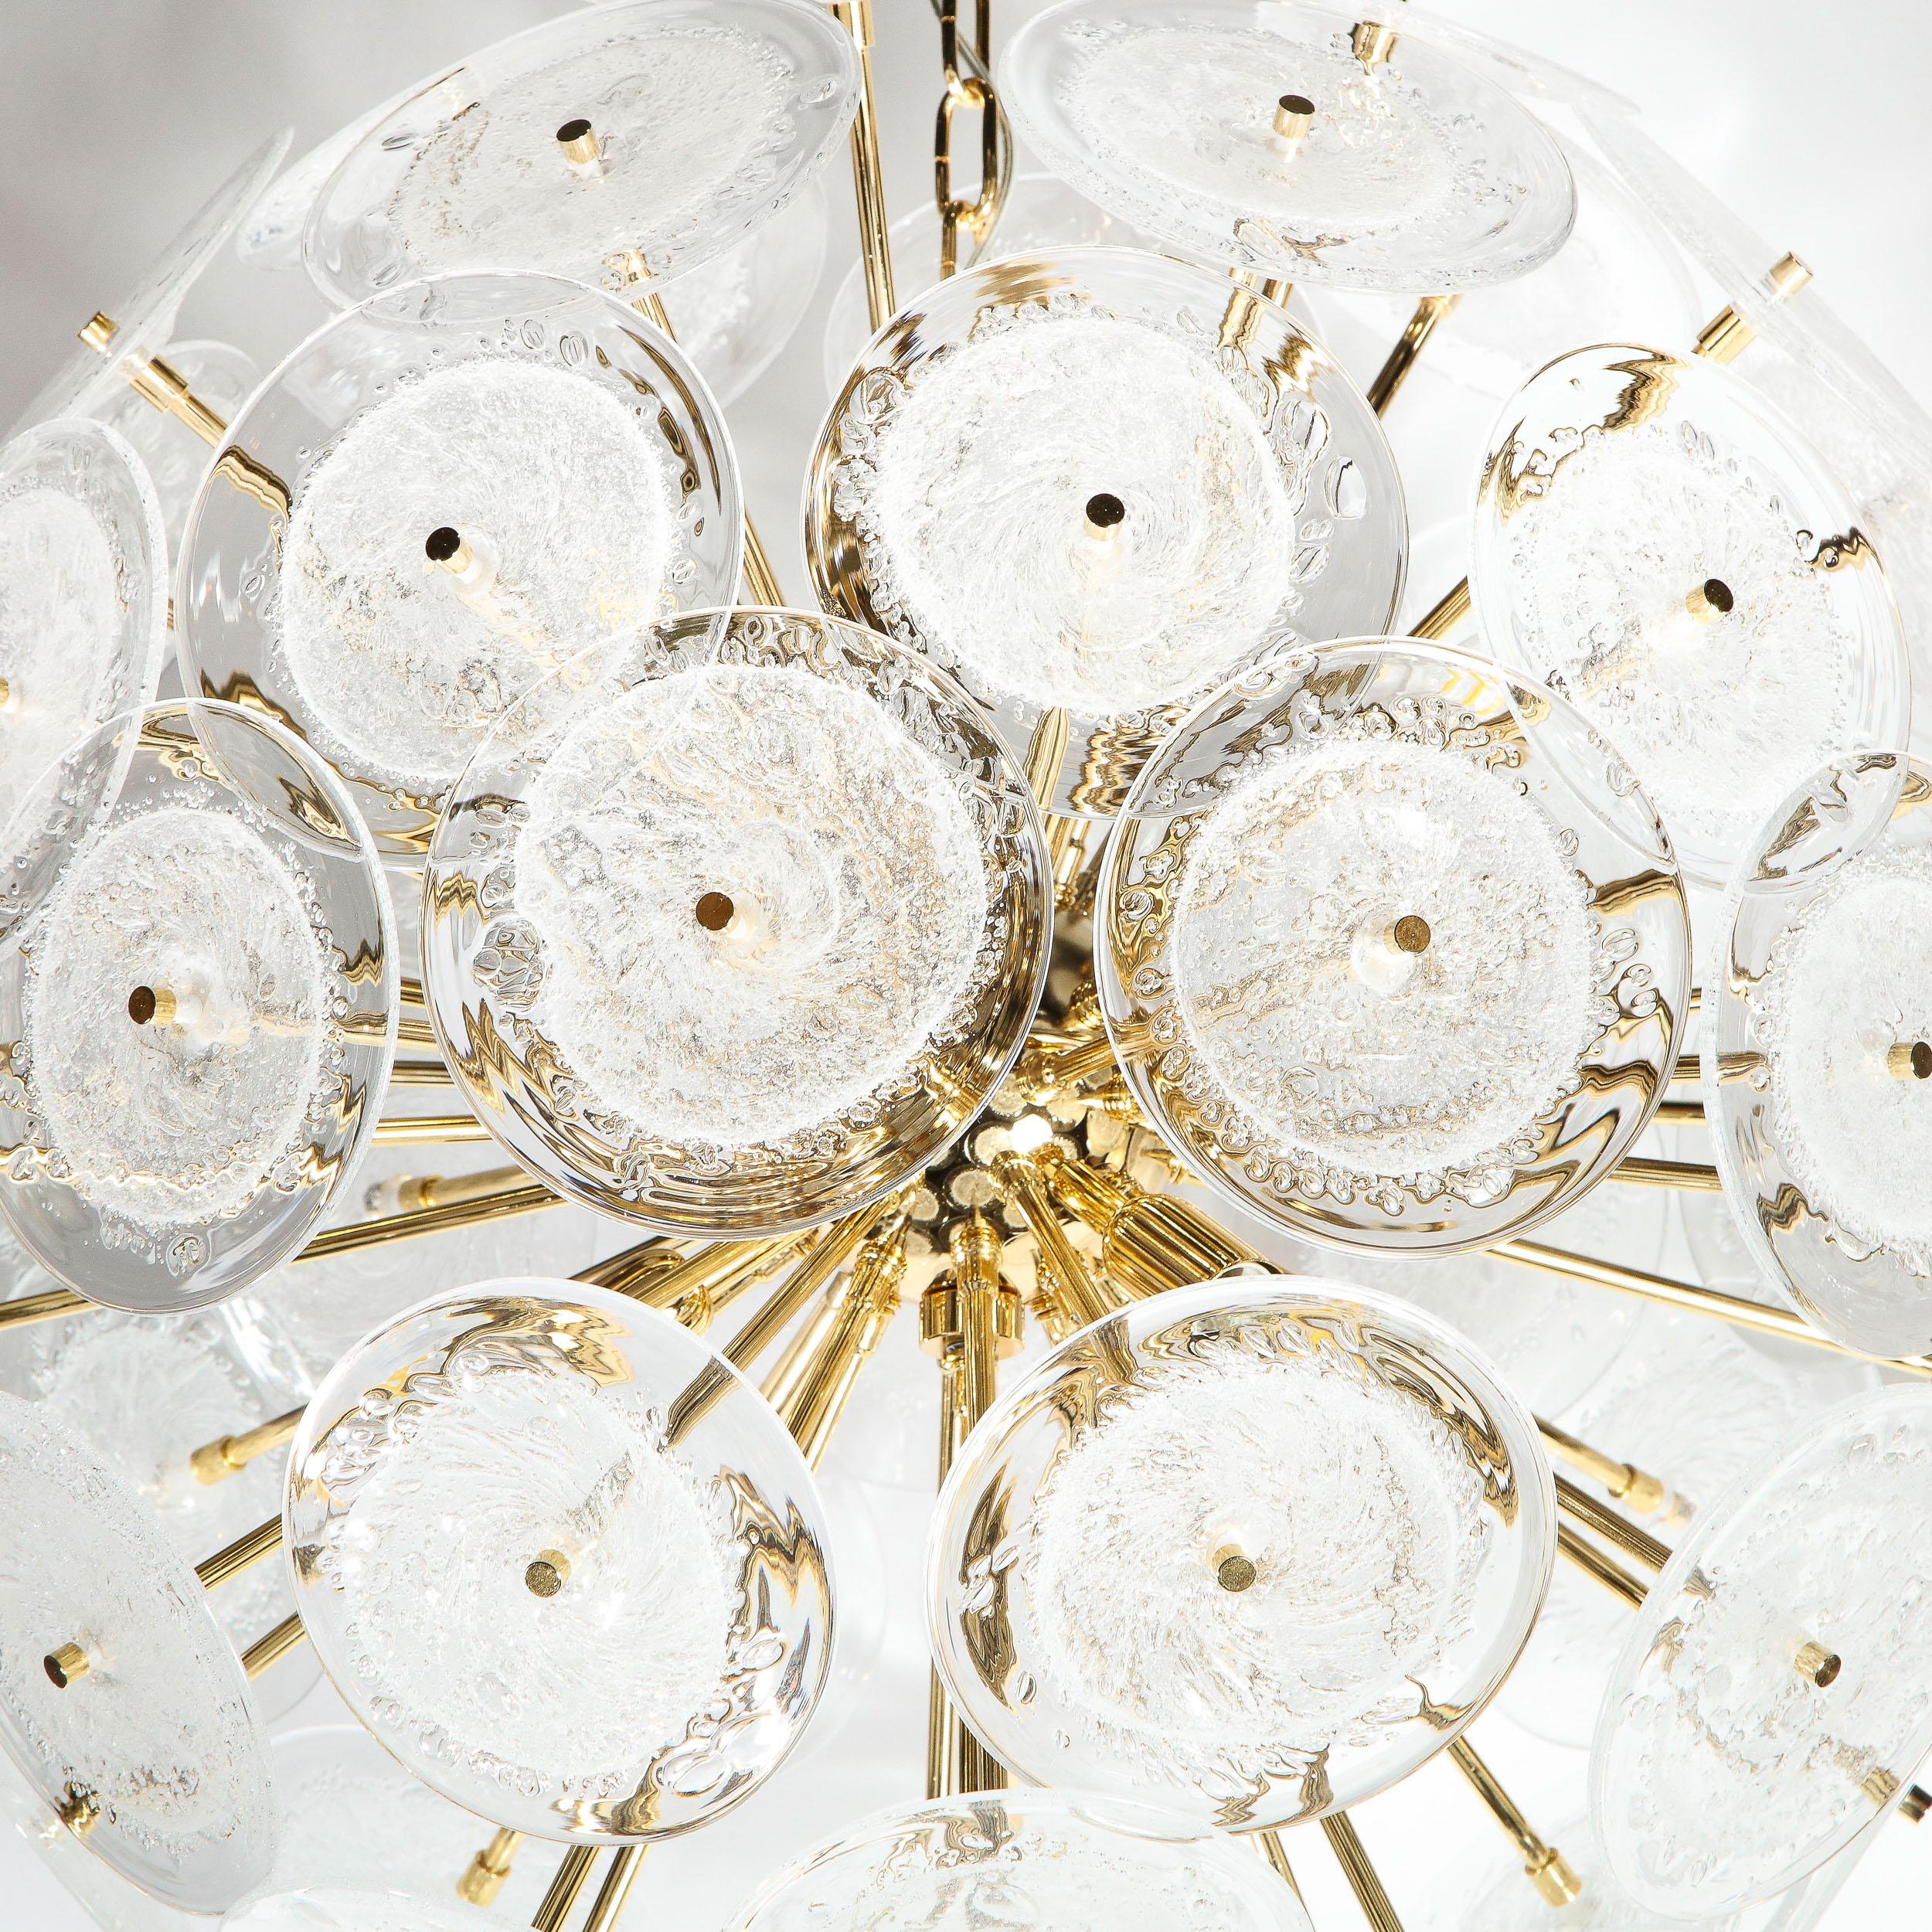 Polished Brass Sputnik Chandelier with Hand Blown Translucent Murano Glass Discs For Sale 4